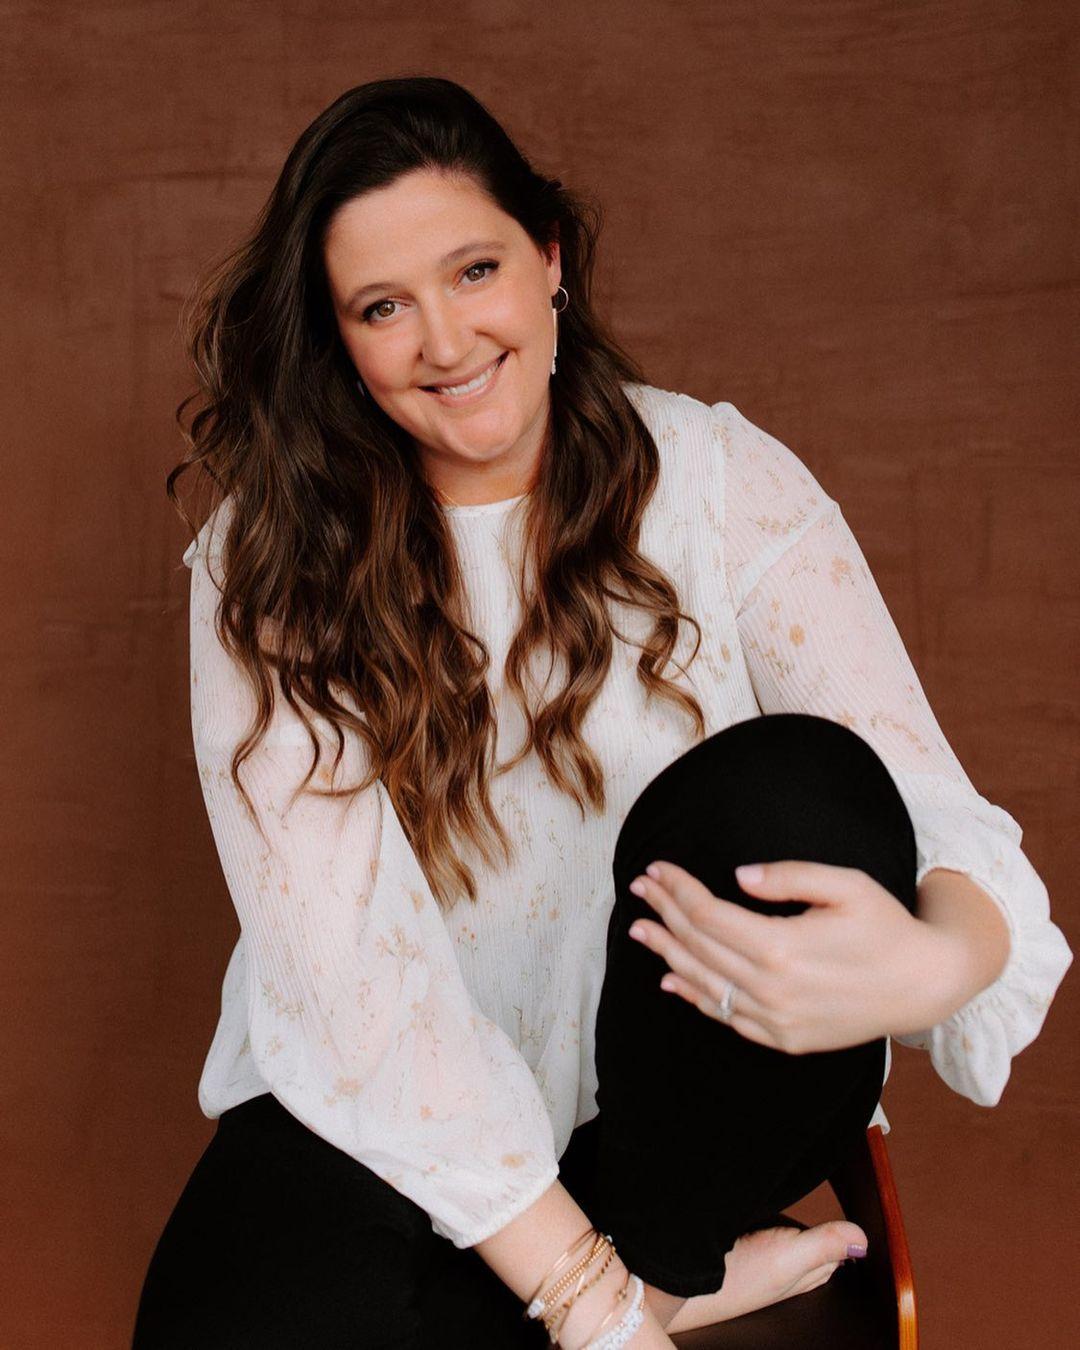 Fans Flood Tori Roloff With Ideas For Her Social Media Step Up